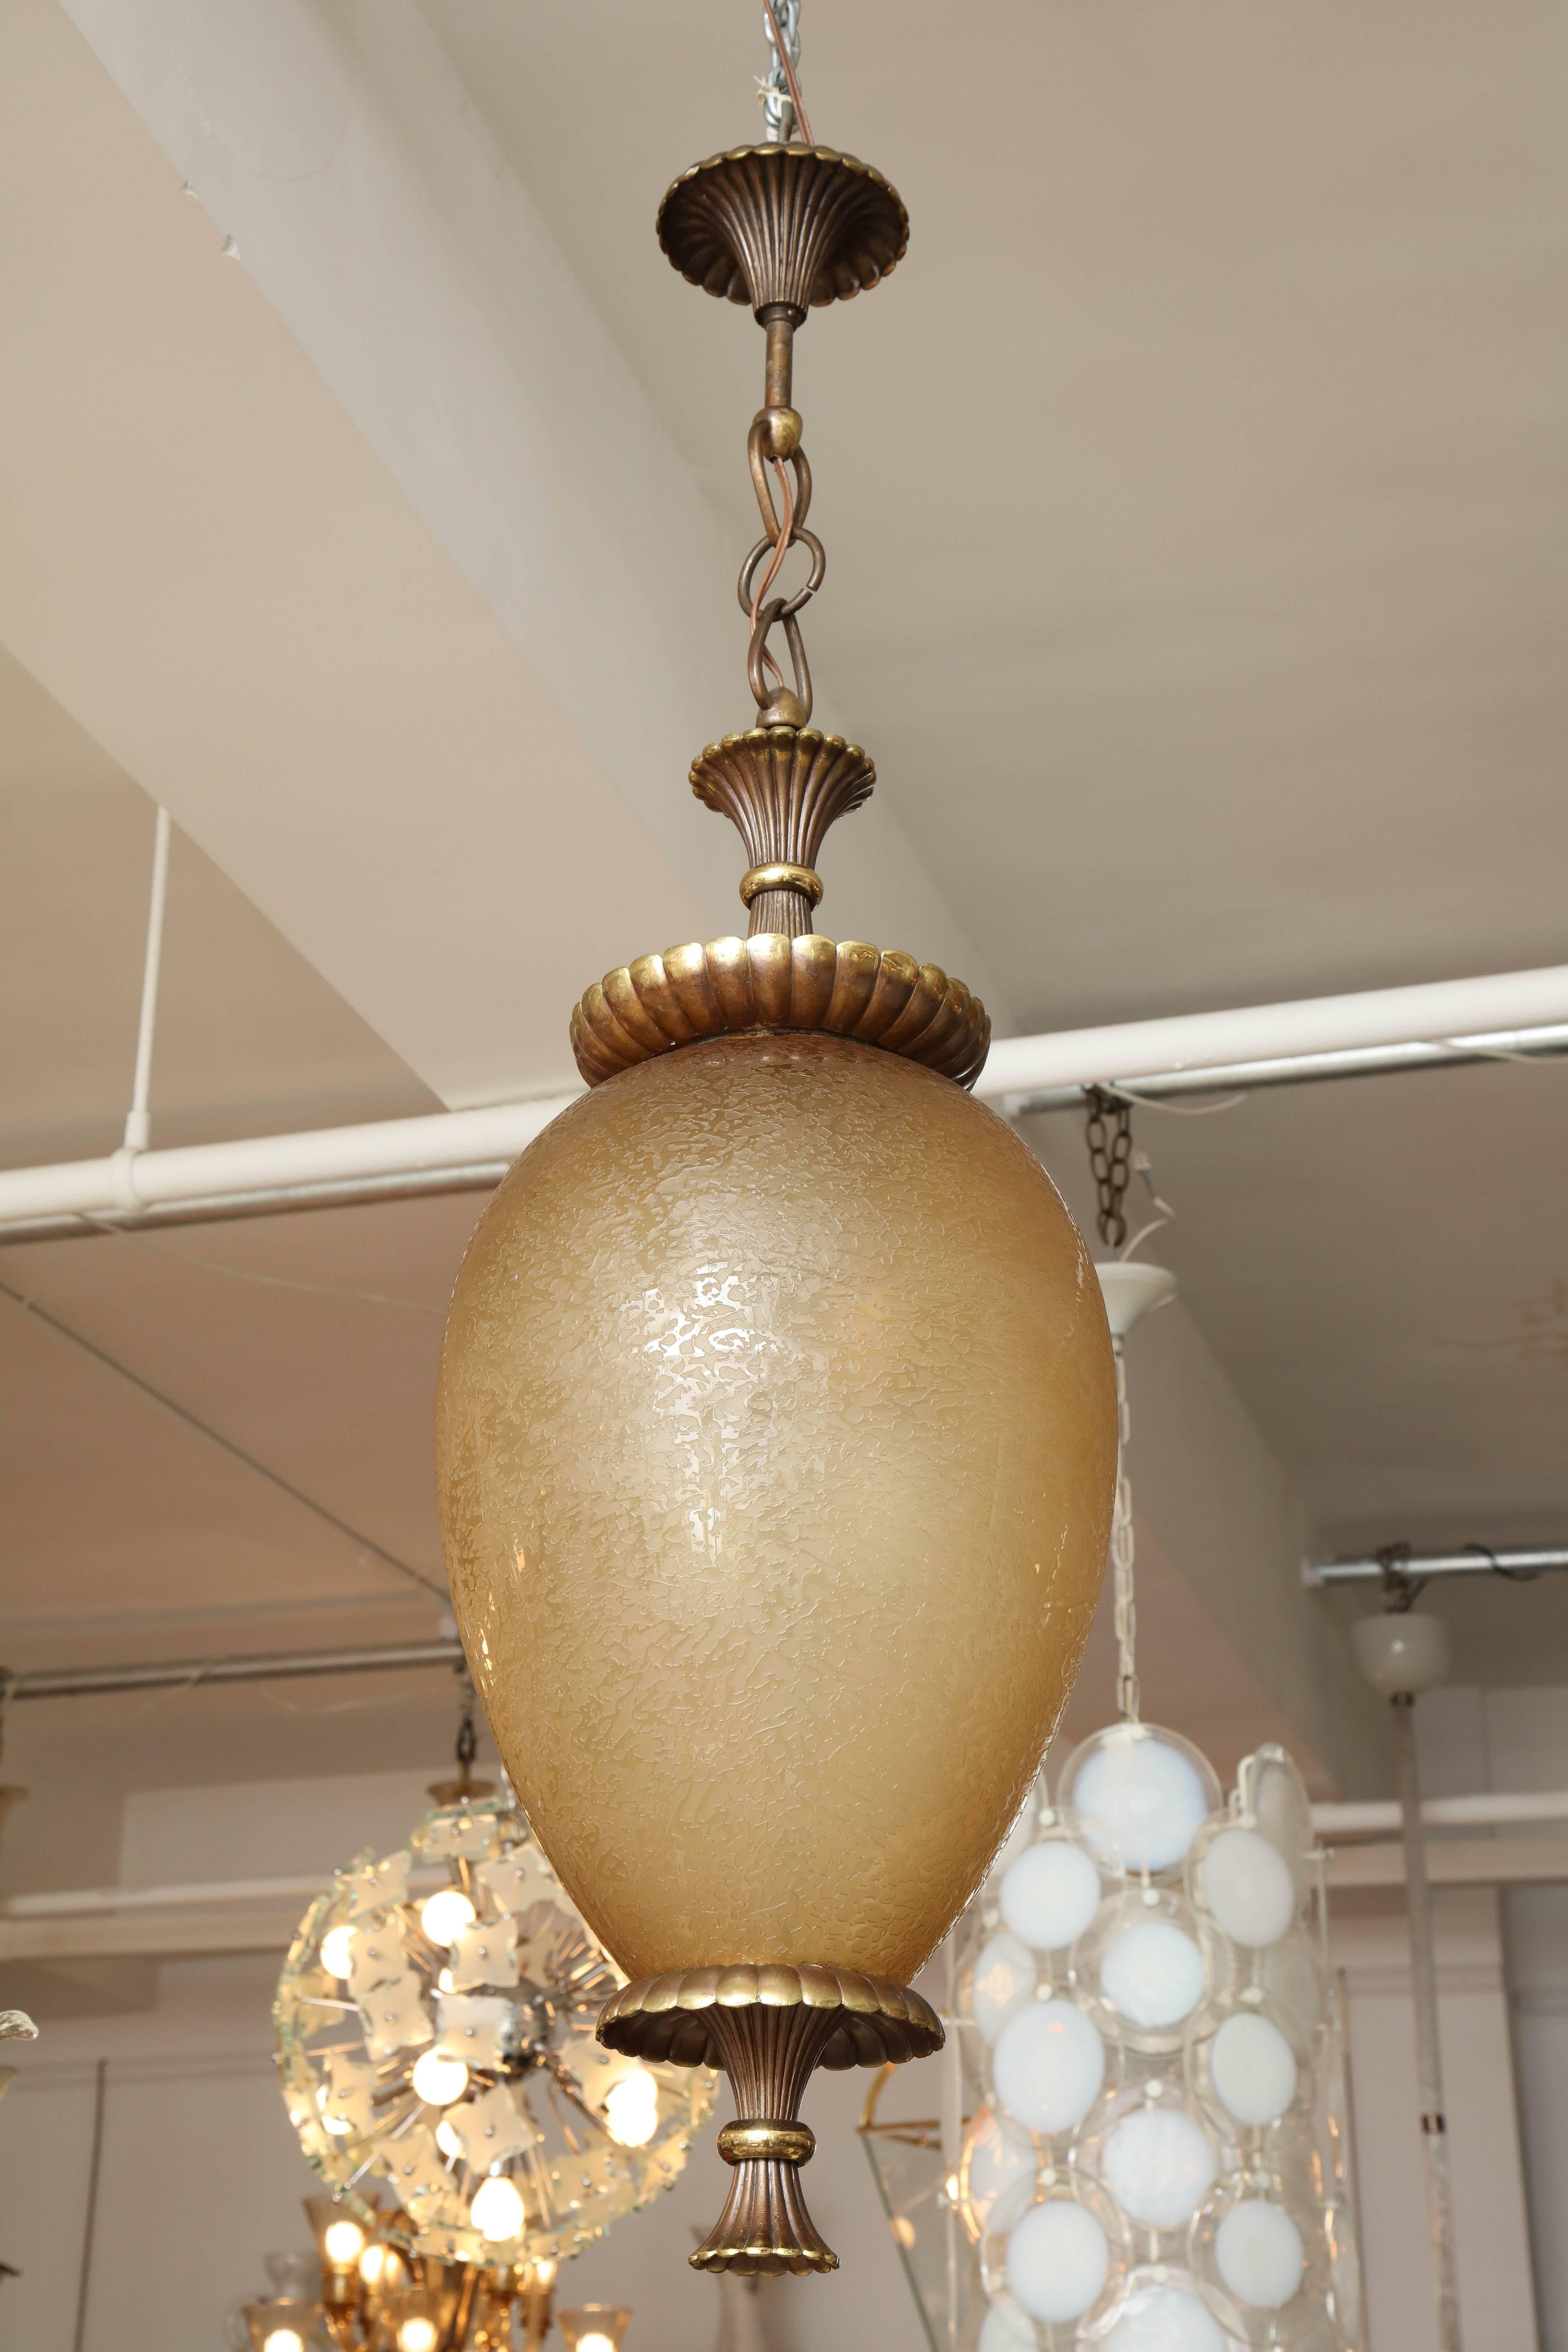 Seguso Vetri d'Arte pendand light made in Venice 1940. Large gold blown glass shade with a acid etched "paglierino" design on the surface with a beautifully made bronze frame, great quality, can work in any setting hall, stairwell. Takes